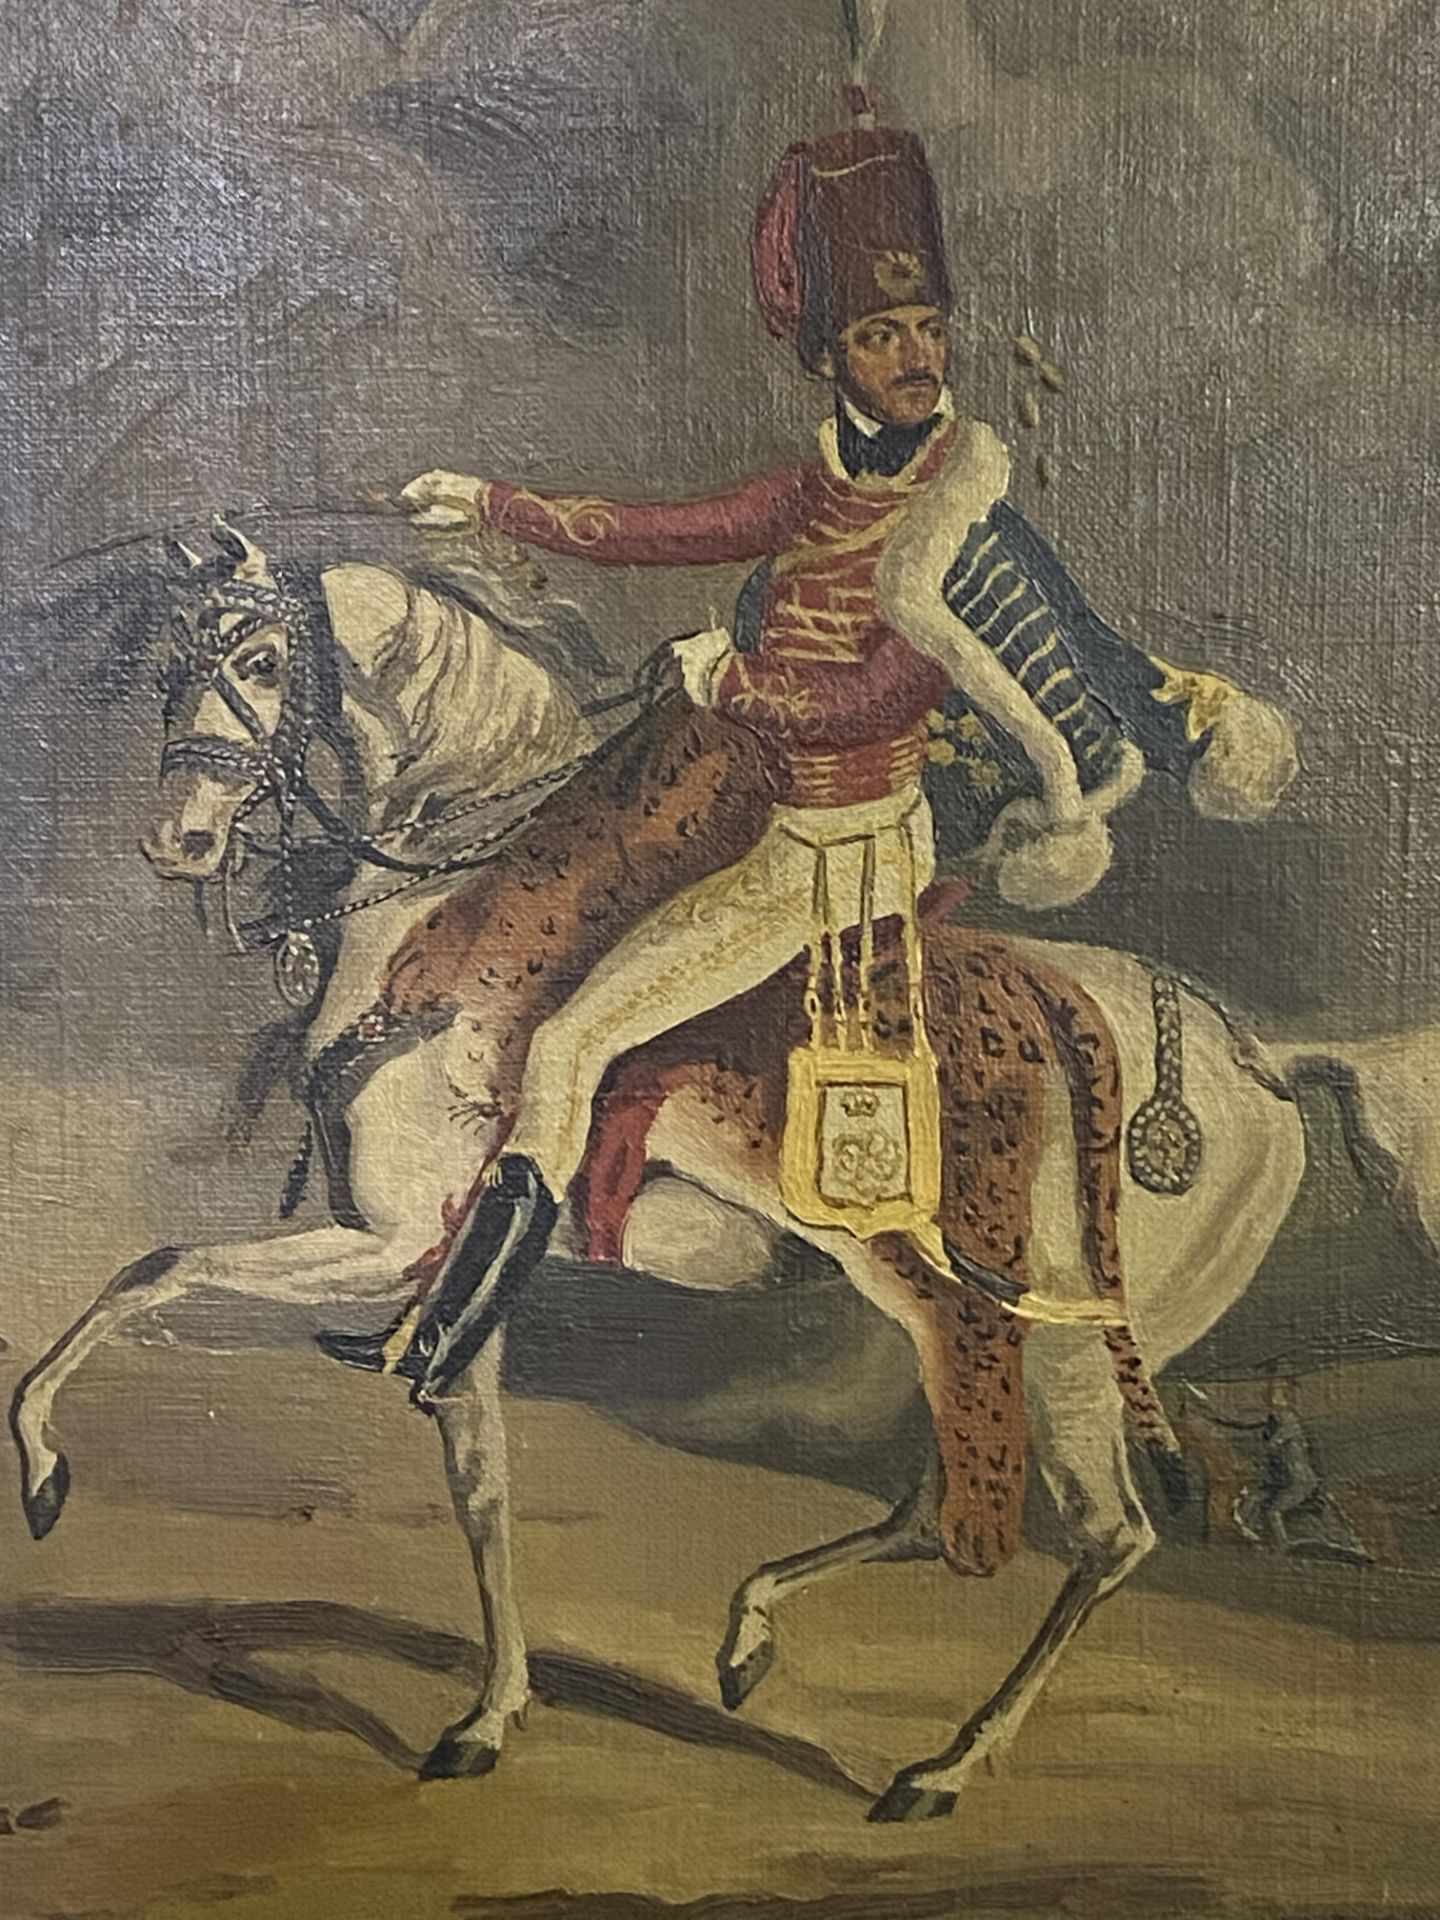 Framed oil on canvas, The Marquis of Anglesea. From the Estate of Dame Mary Quant